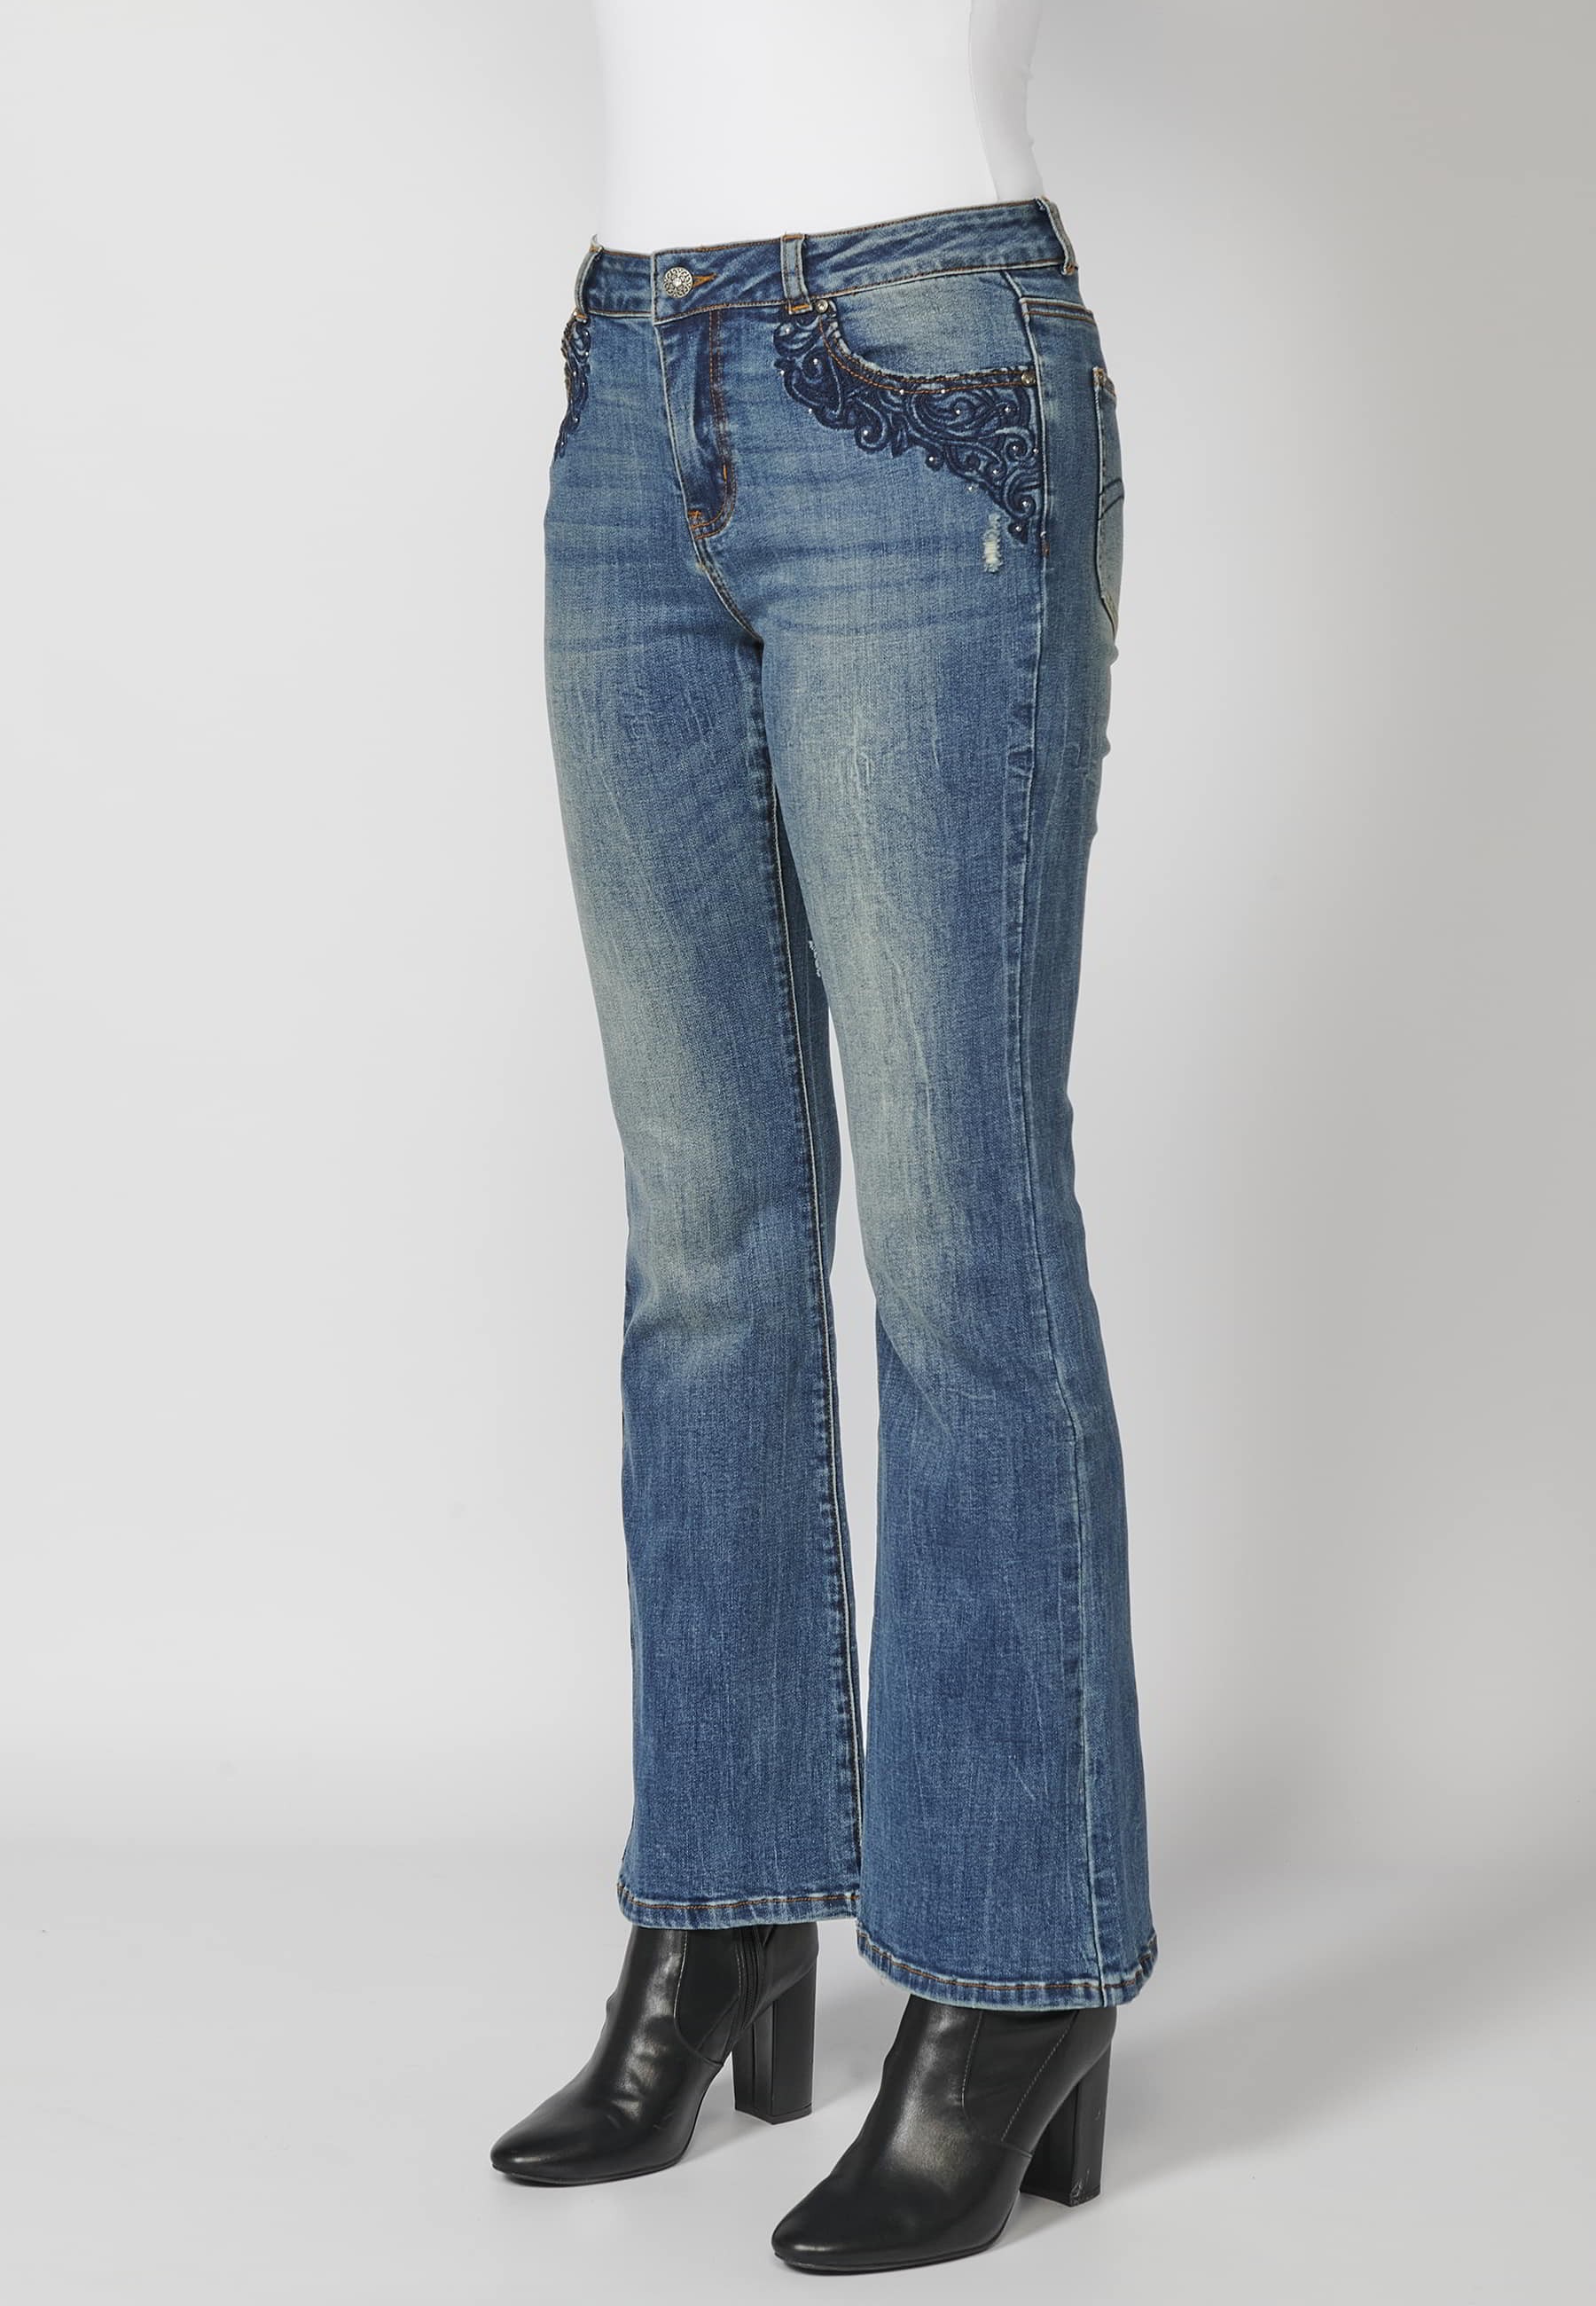 Long flared denim pants with embroidered details on the pockets in Dark Blue for Women